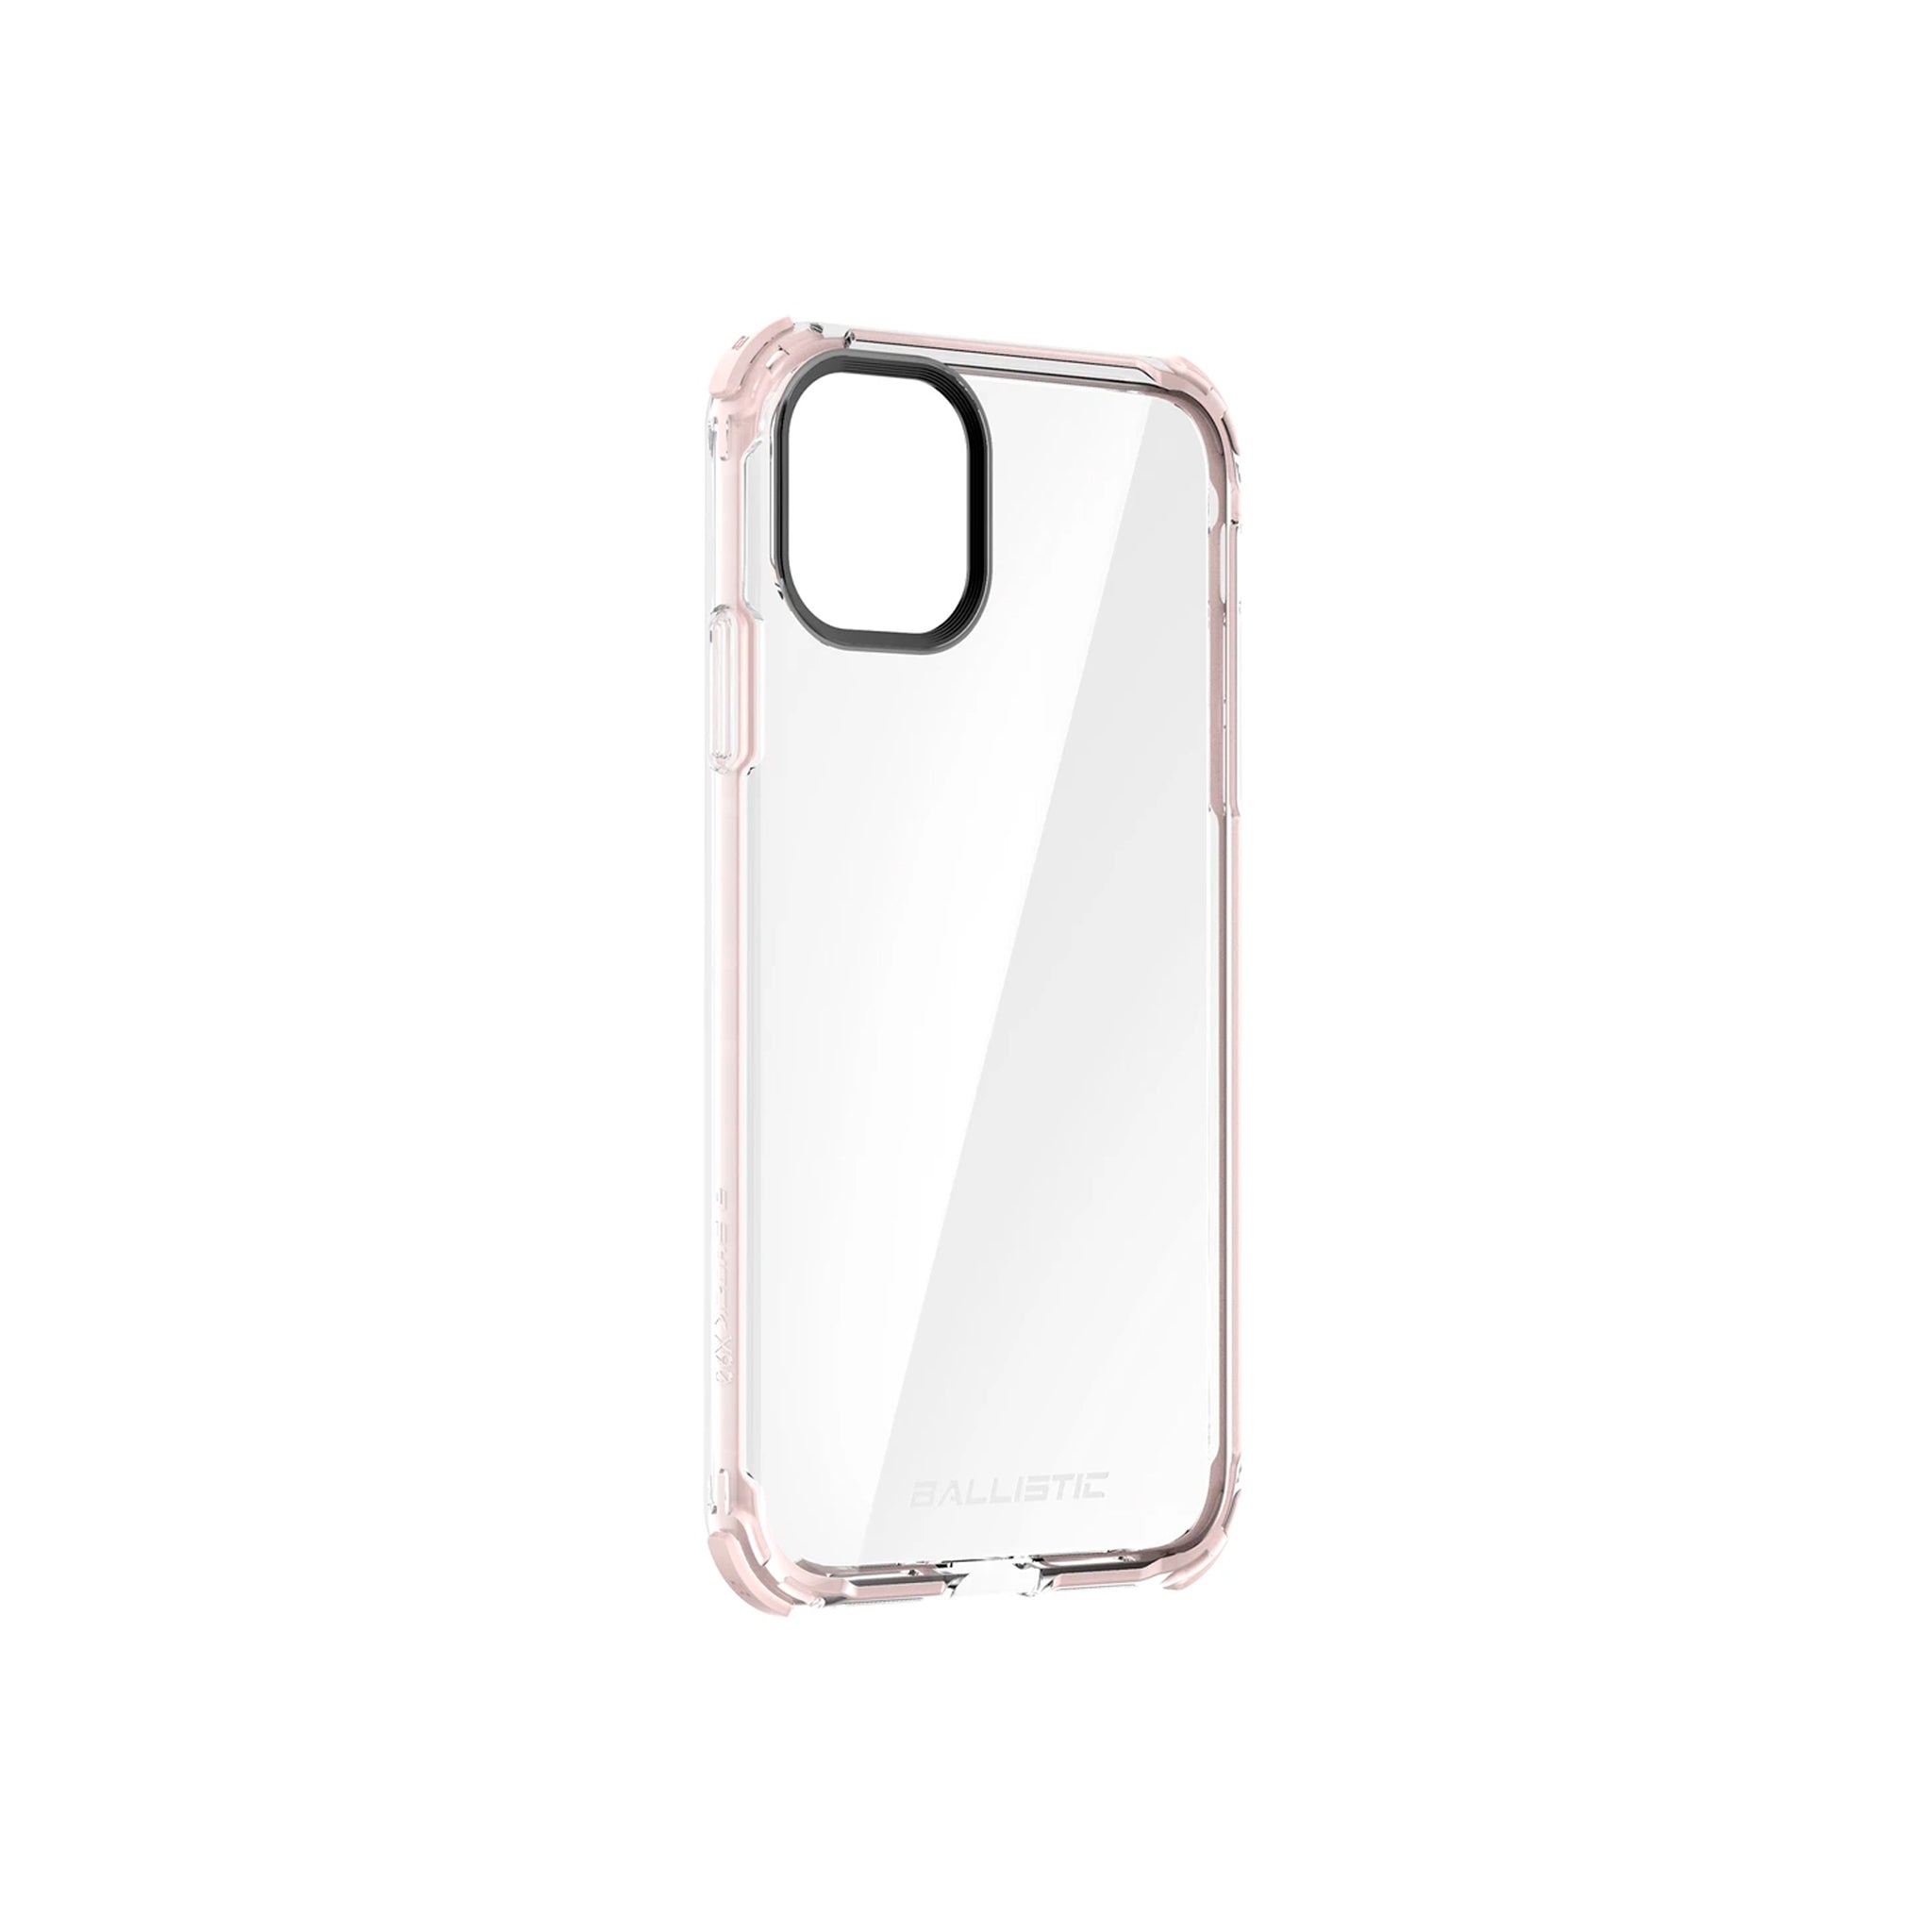 Ballistic - Bshock X90 Series For iPhone 11  - Pink